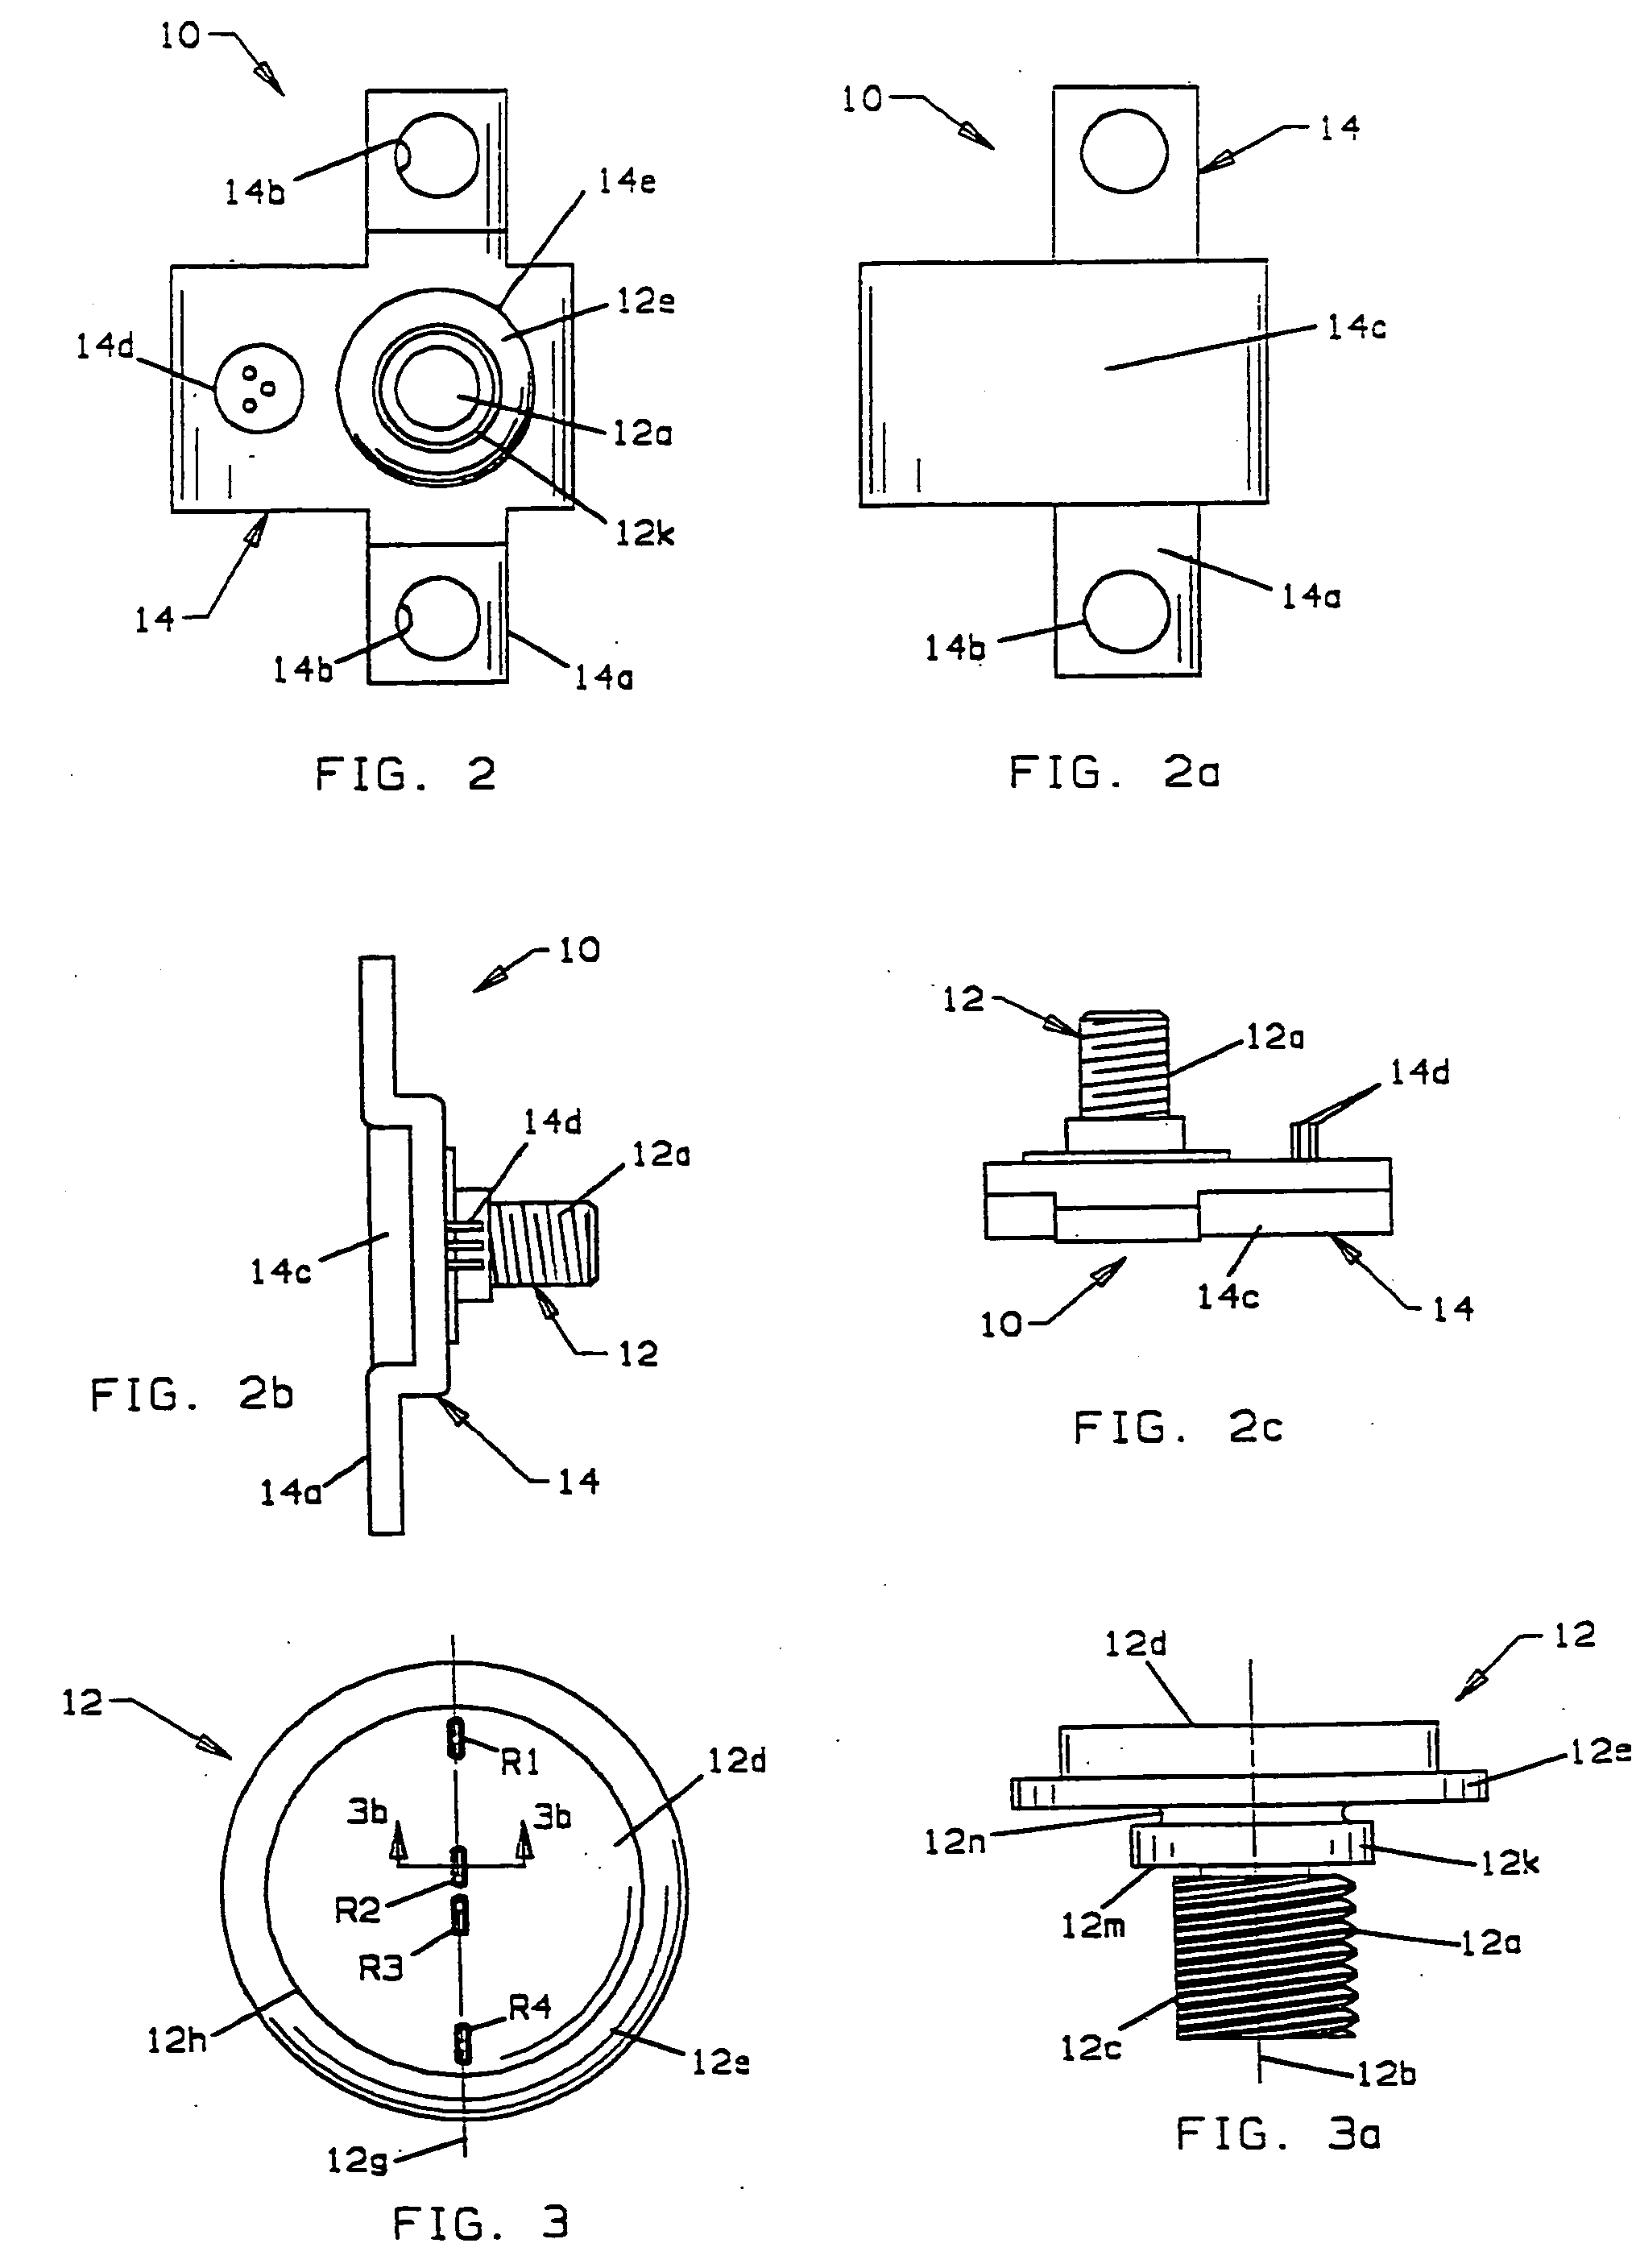 Occupant weight sensor for vehiclular seats, method for making and system therefor